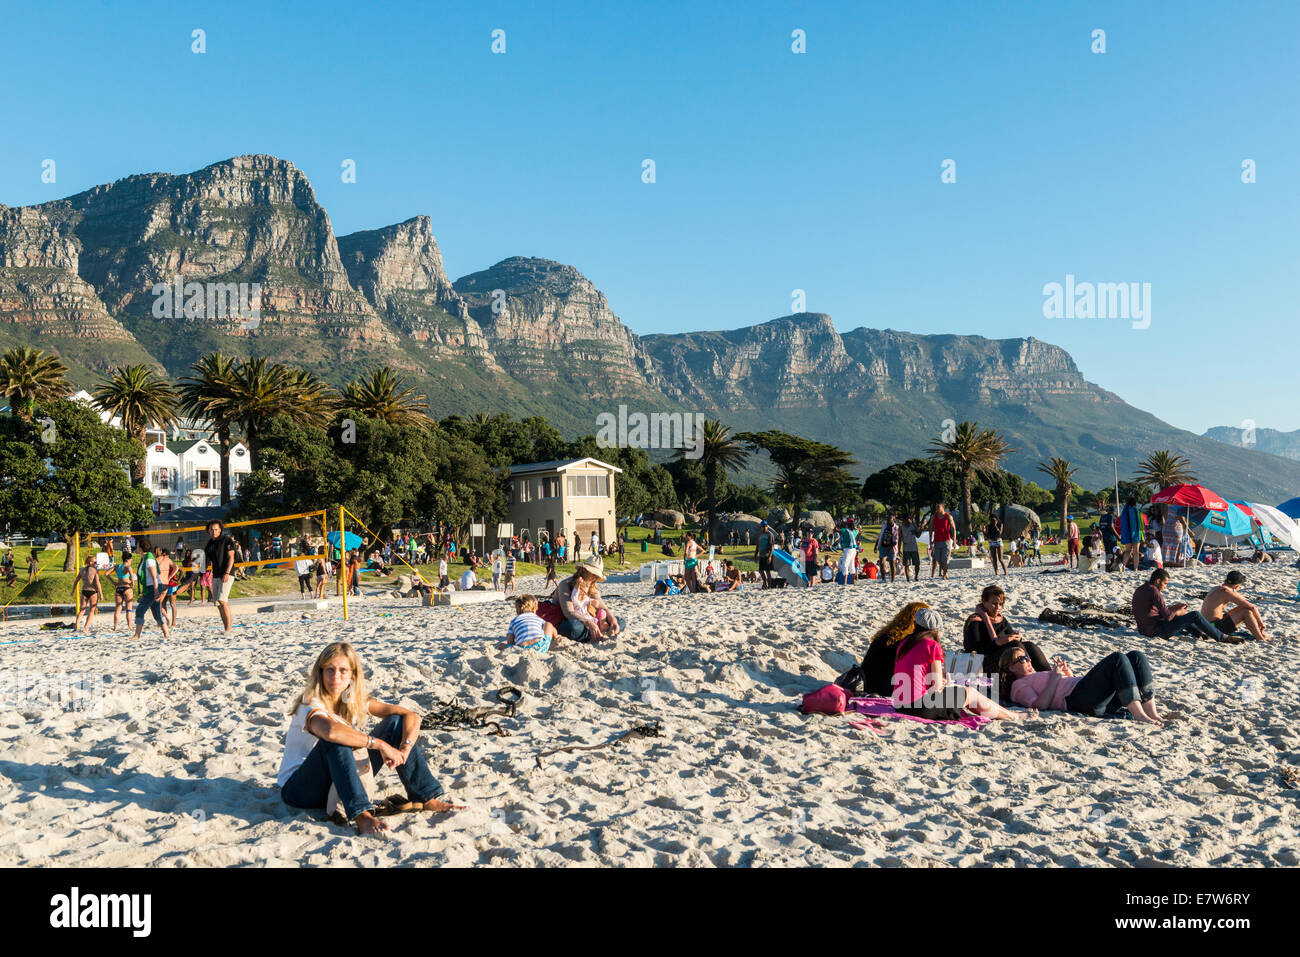 People on the beach of Camps Bay,Table Mountain in the background, Cape Town, South Africa Stock Photo